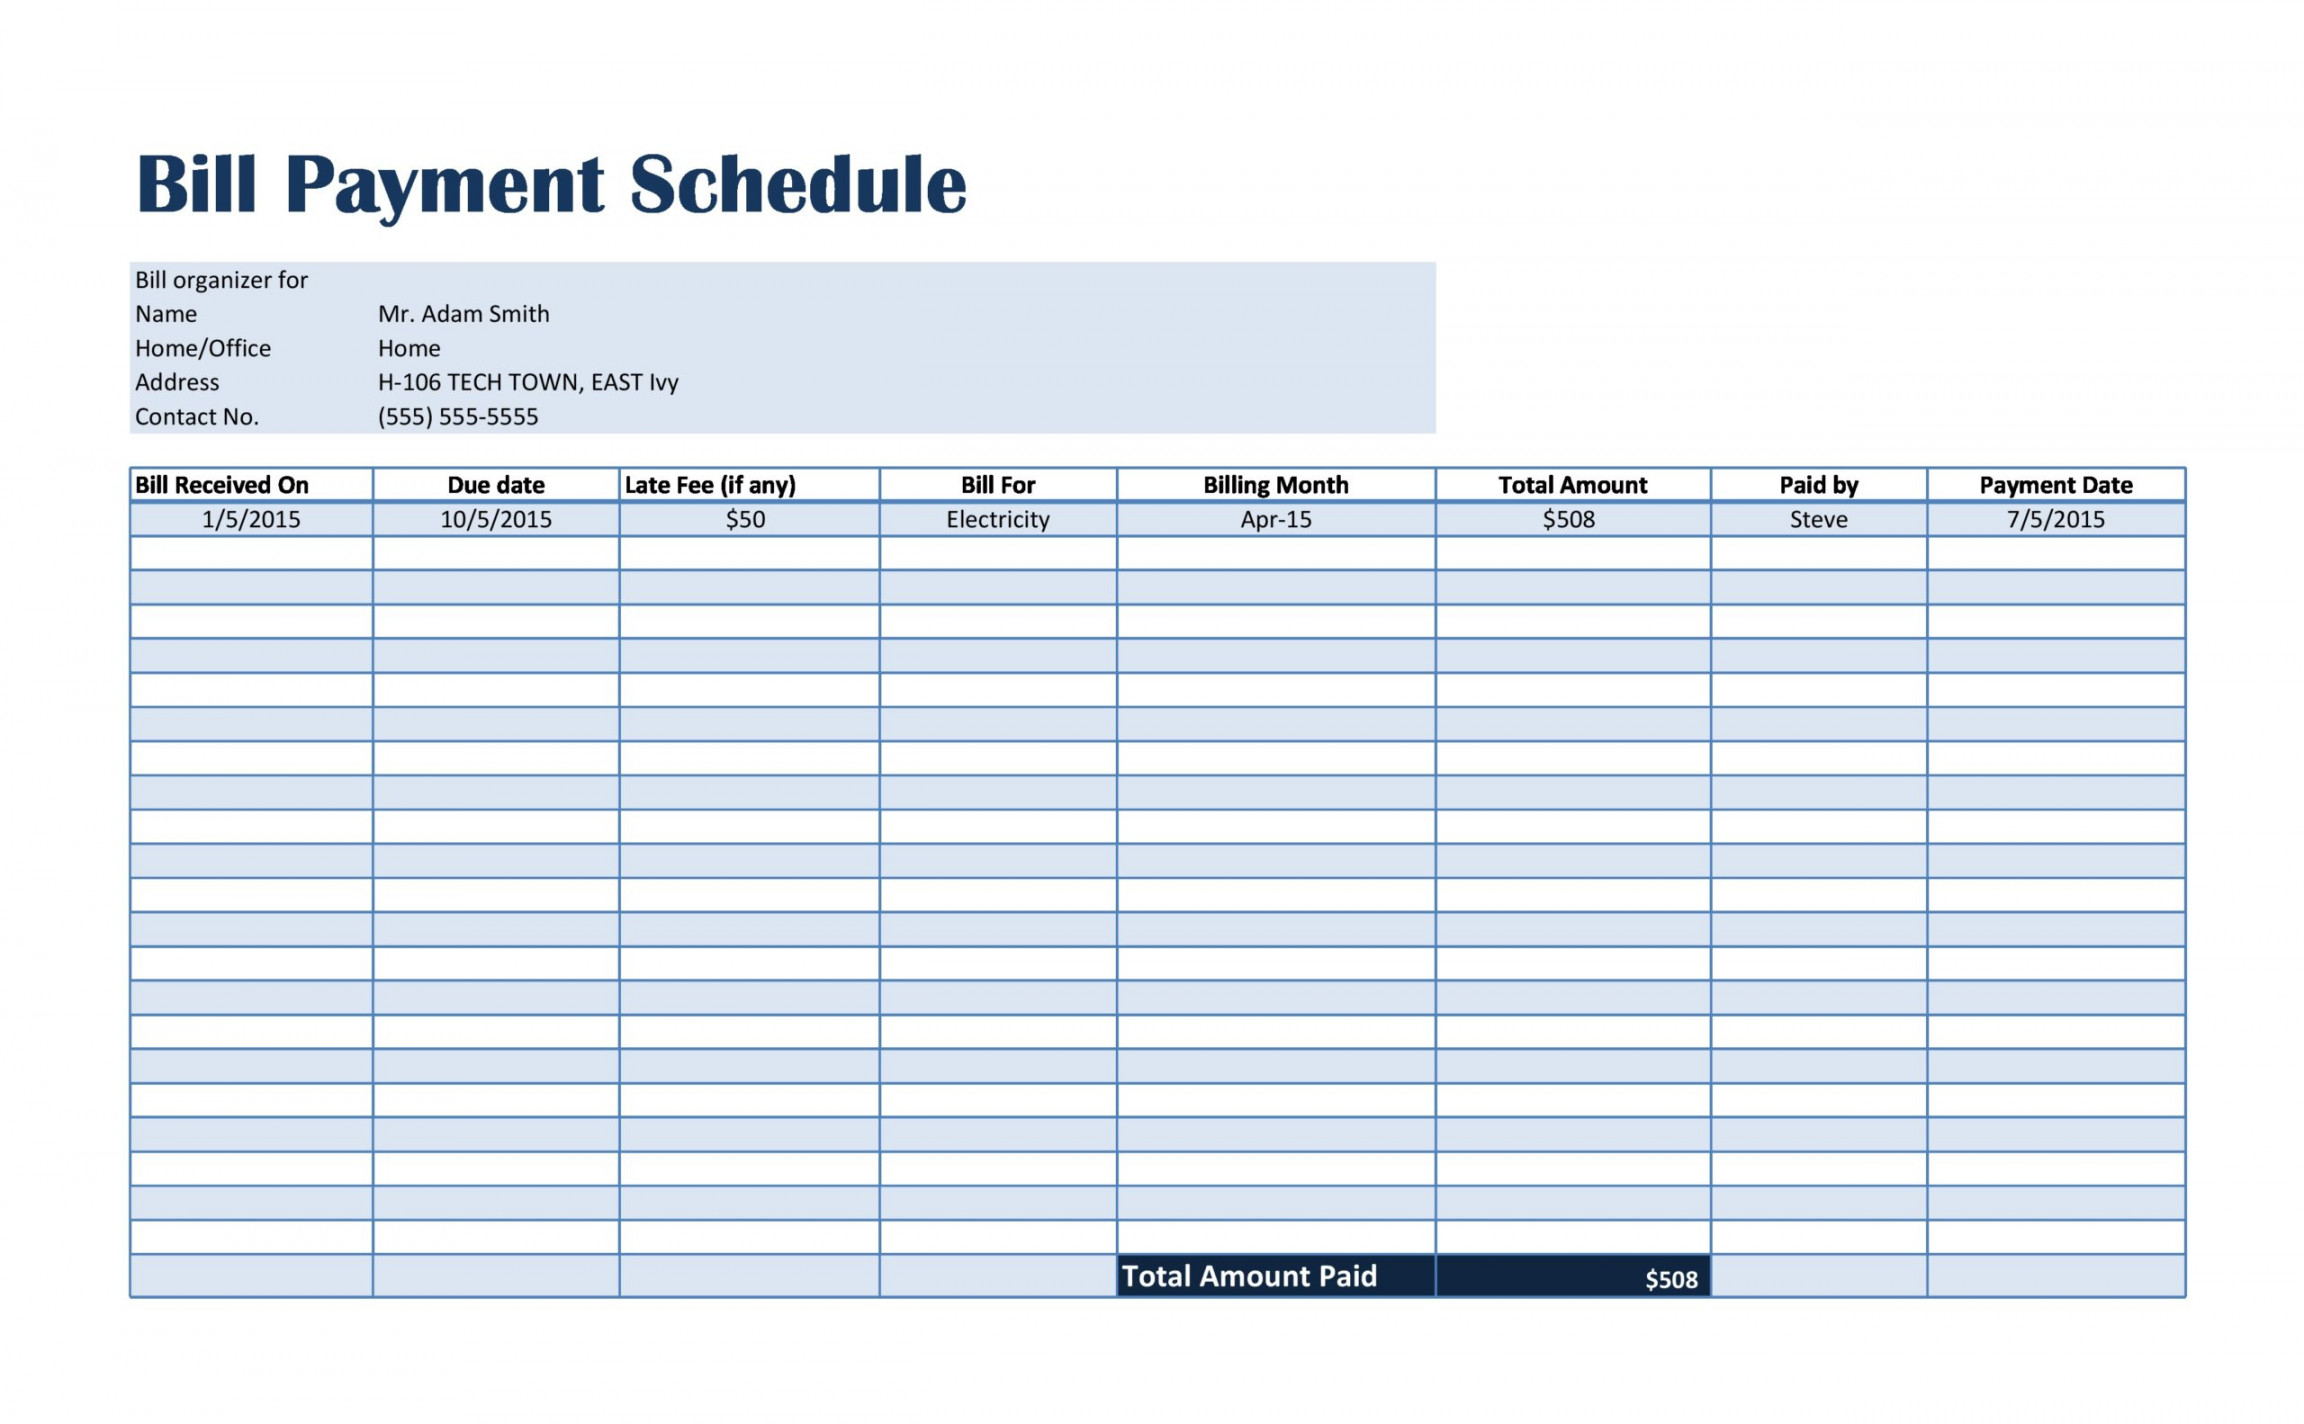 Free Payment Schedule Templates [Excel, Word] ᐅ TemplateLab